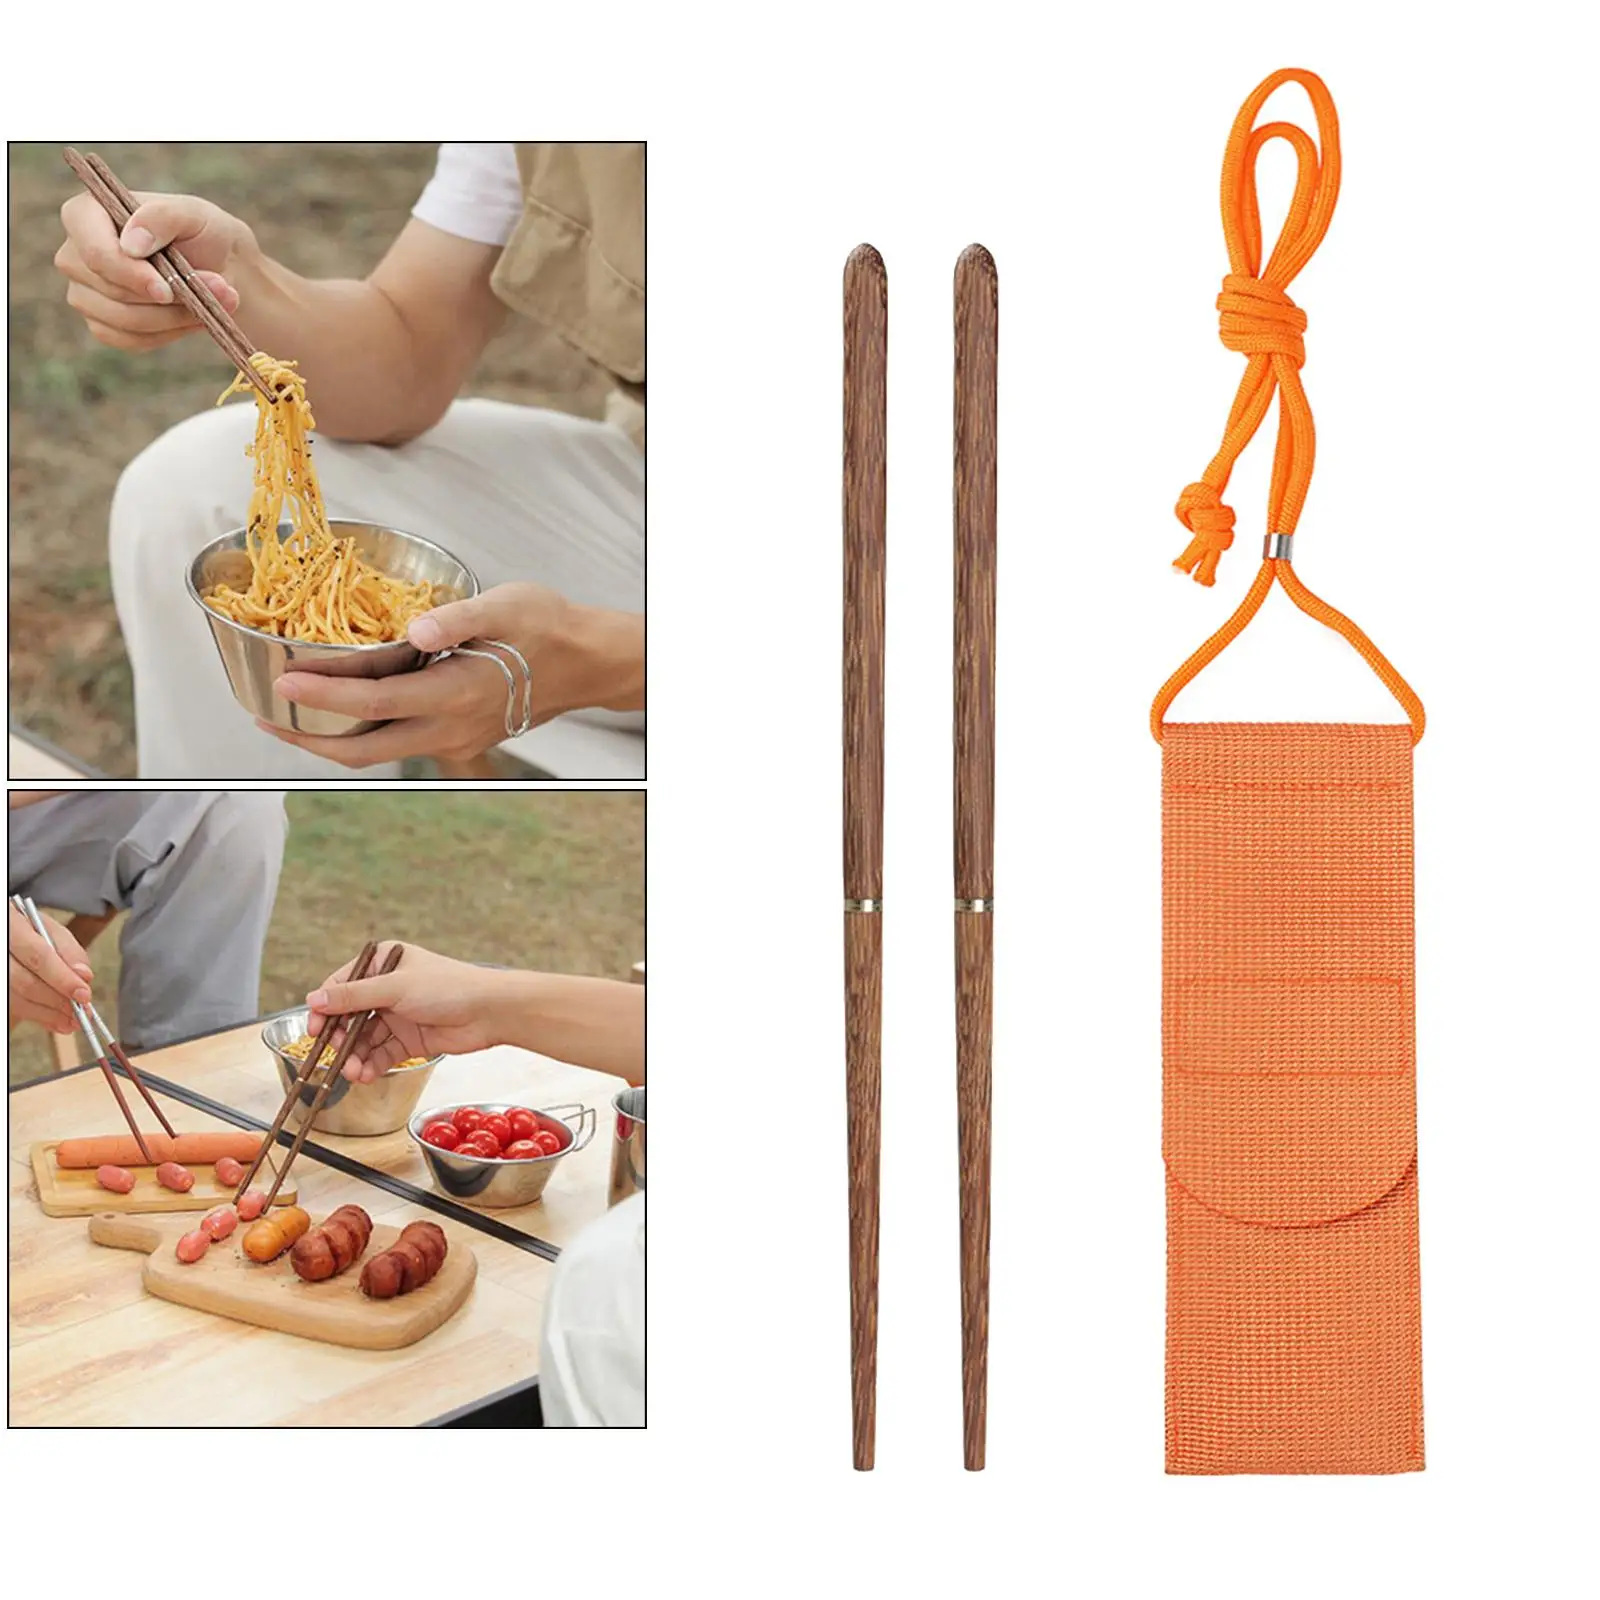 Chopsticks Reusable Wooden Stainless Steel Camping Picnic Chinese Chopstick